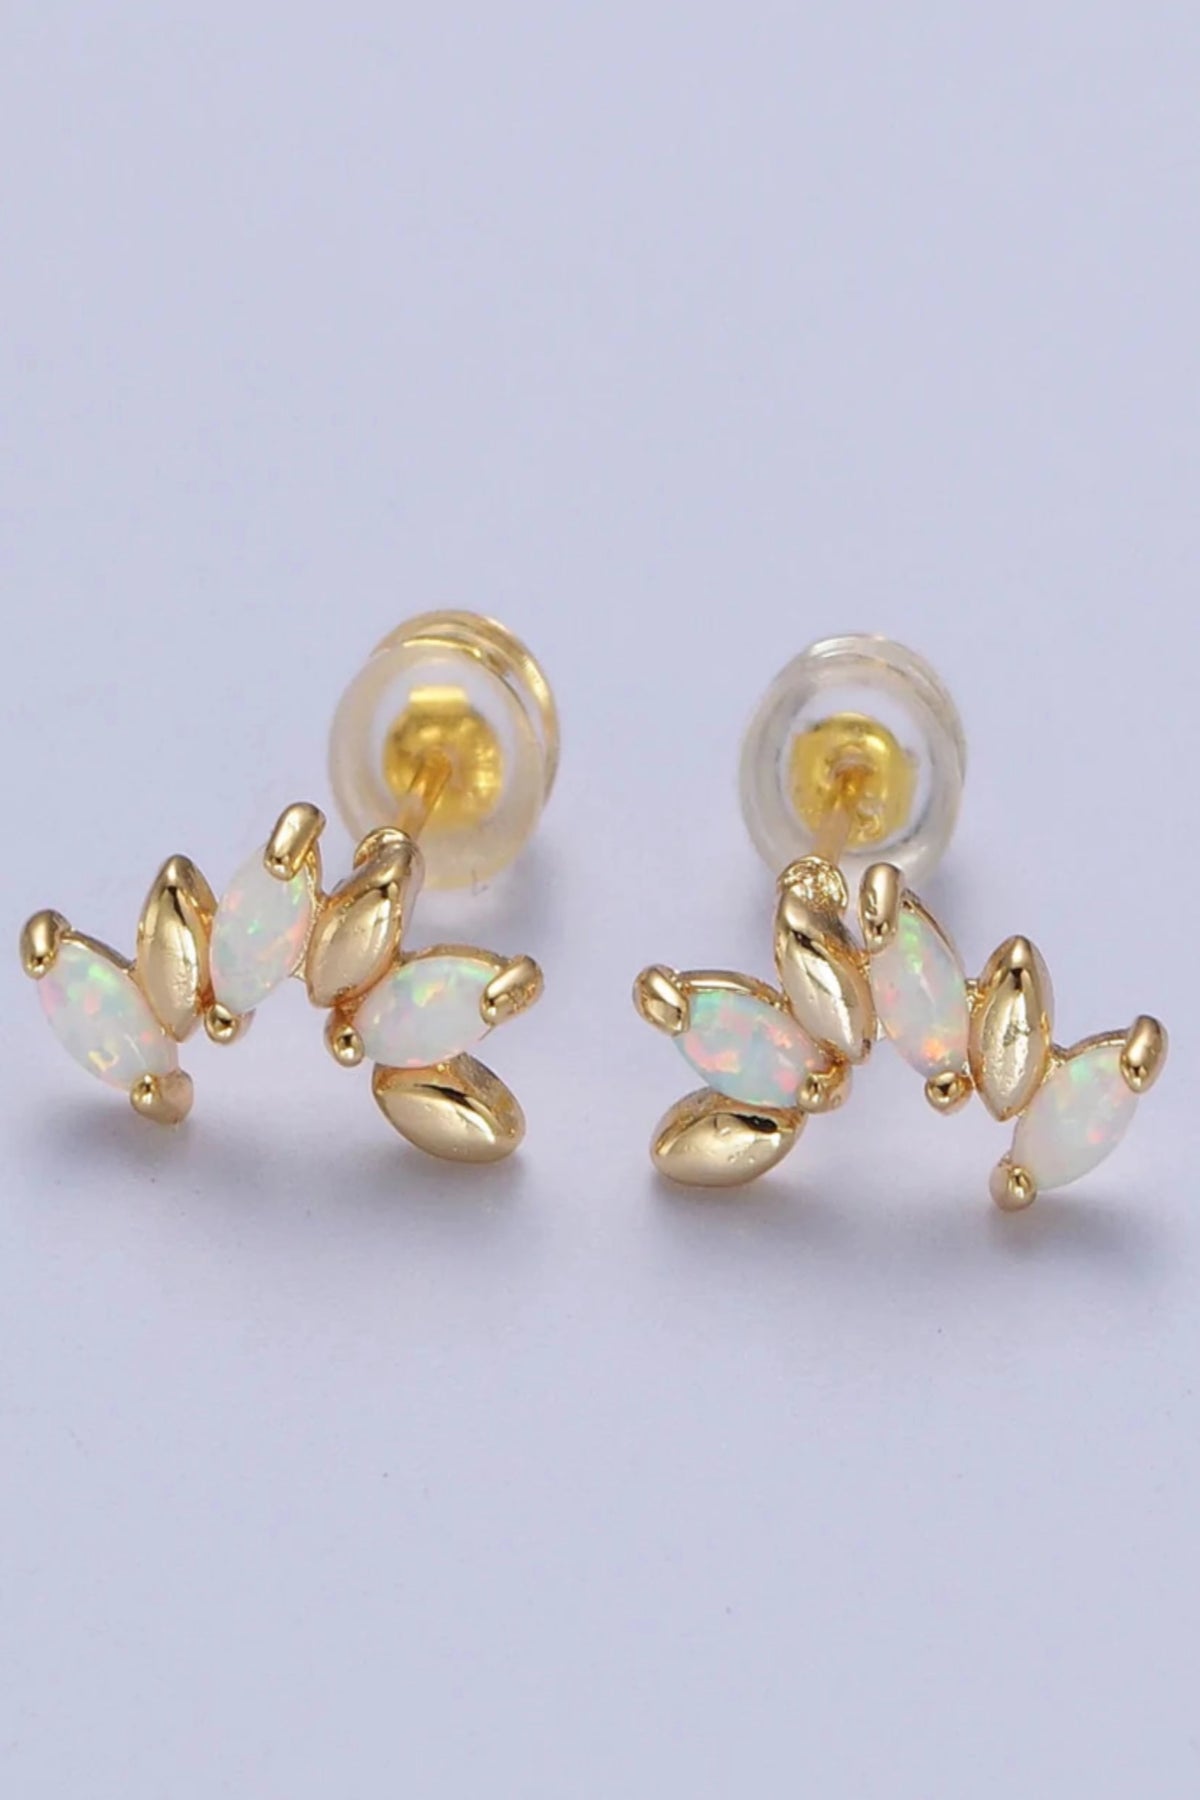 &quot;Gold filled marquise patterned studs with alternating gold and opal marquise shapes.&quot;